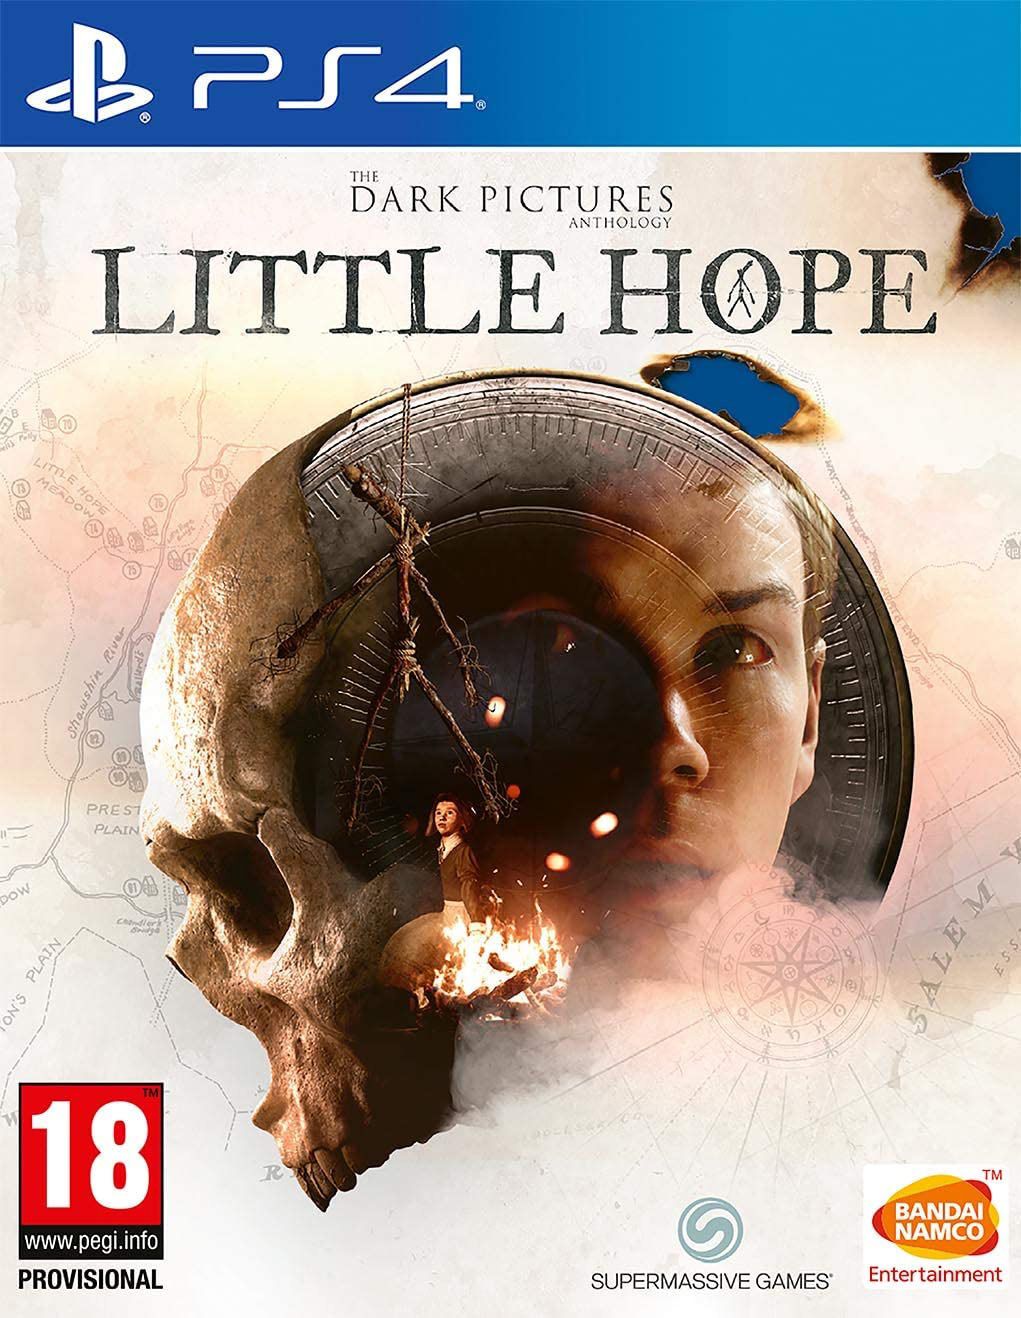 Dark Pictures Anthology, The - Little Hope (PS4) | PlayStation 4